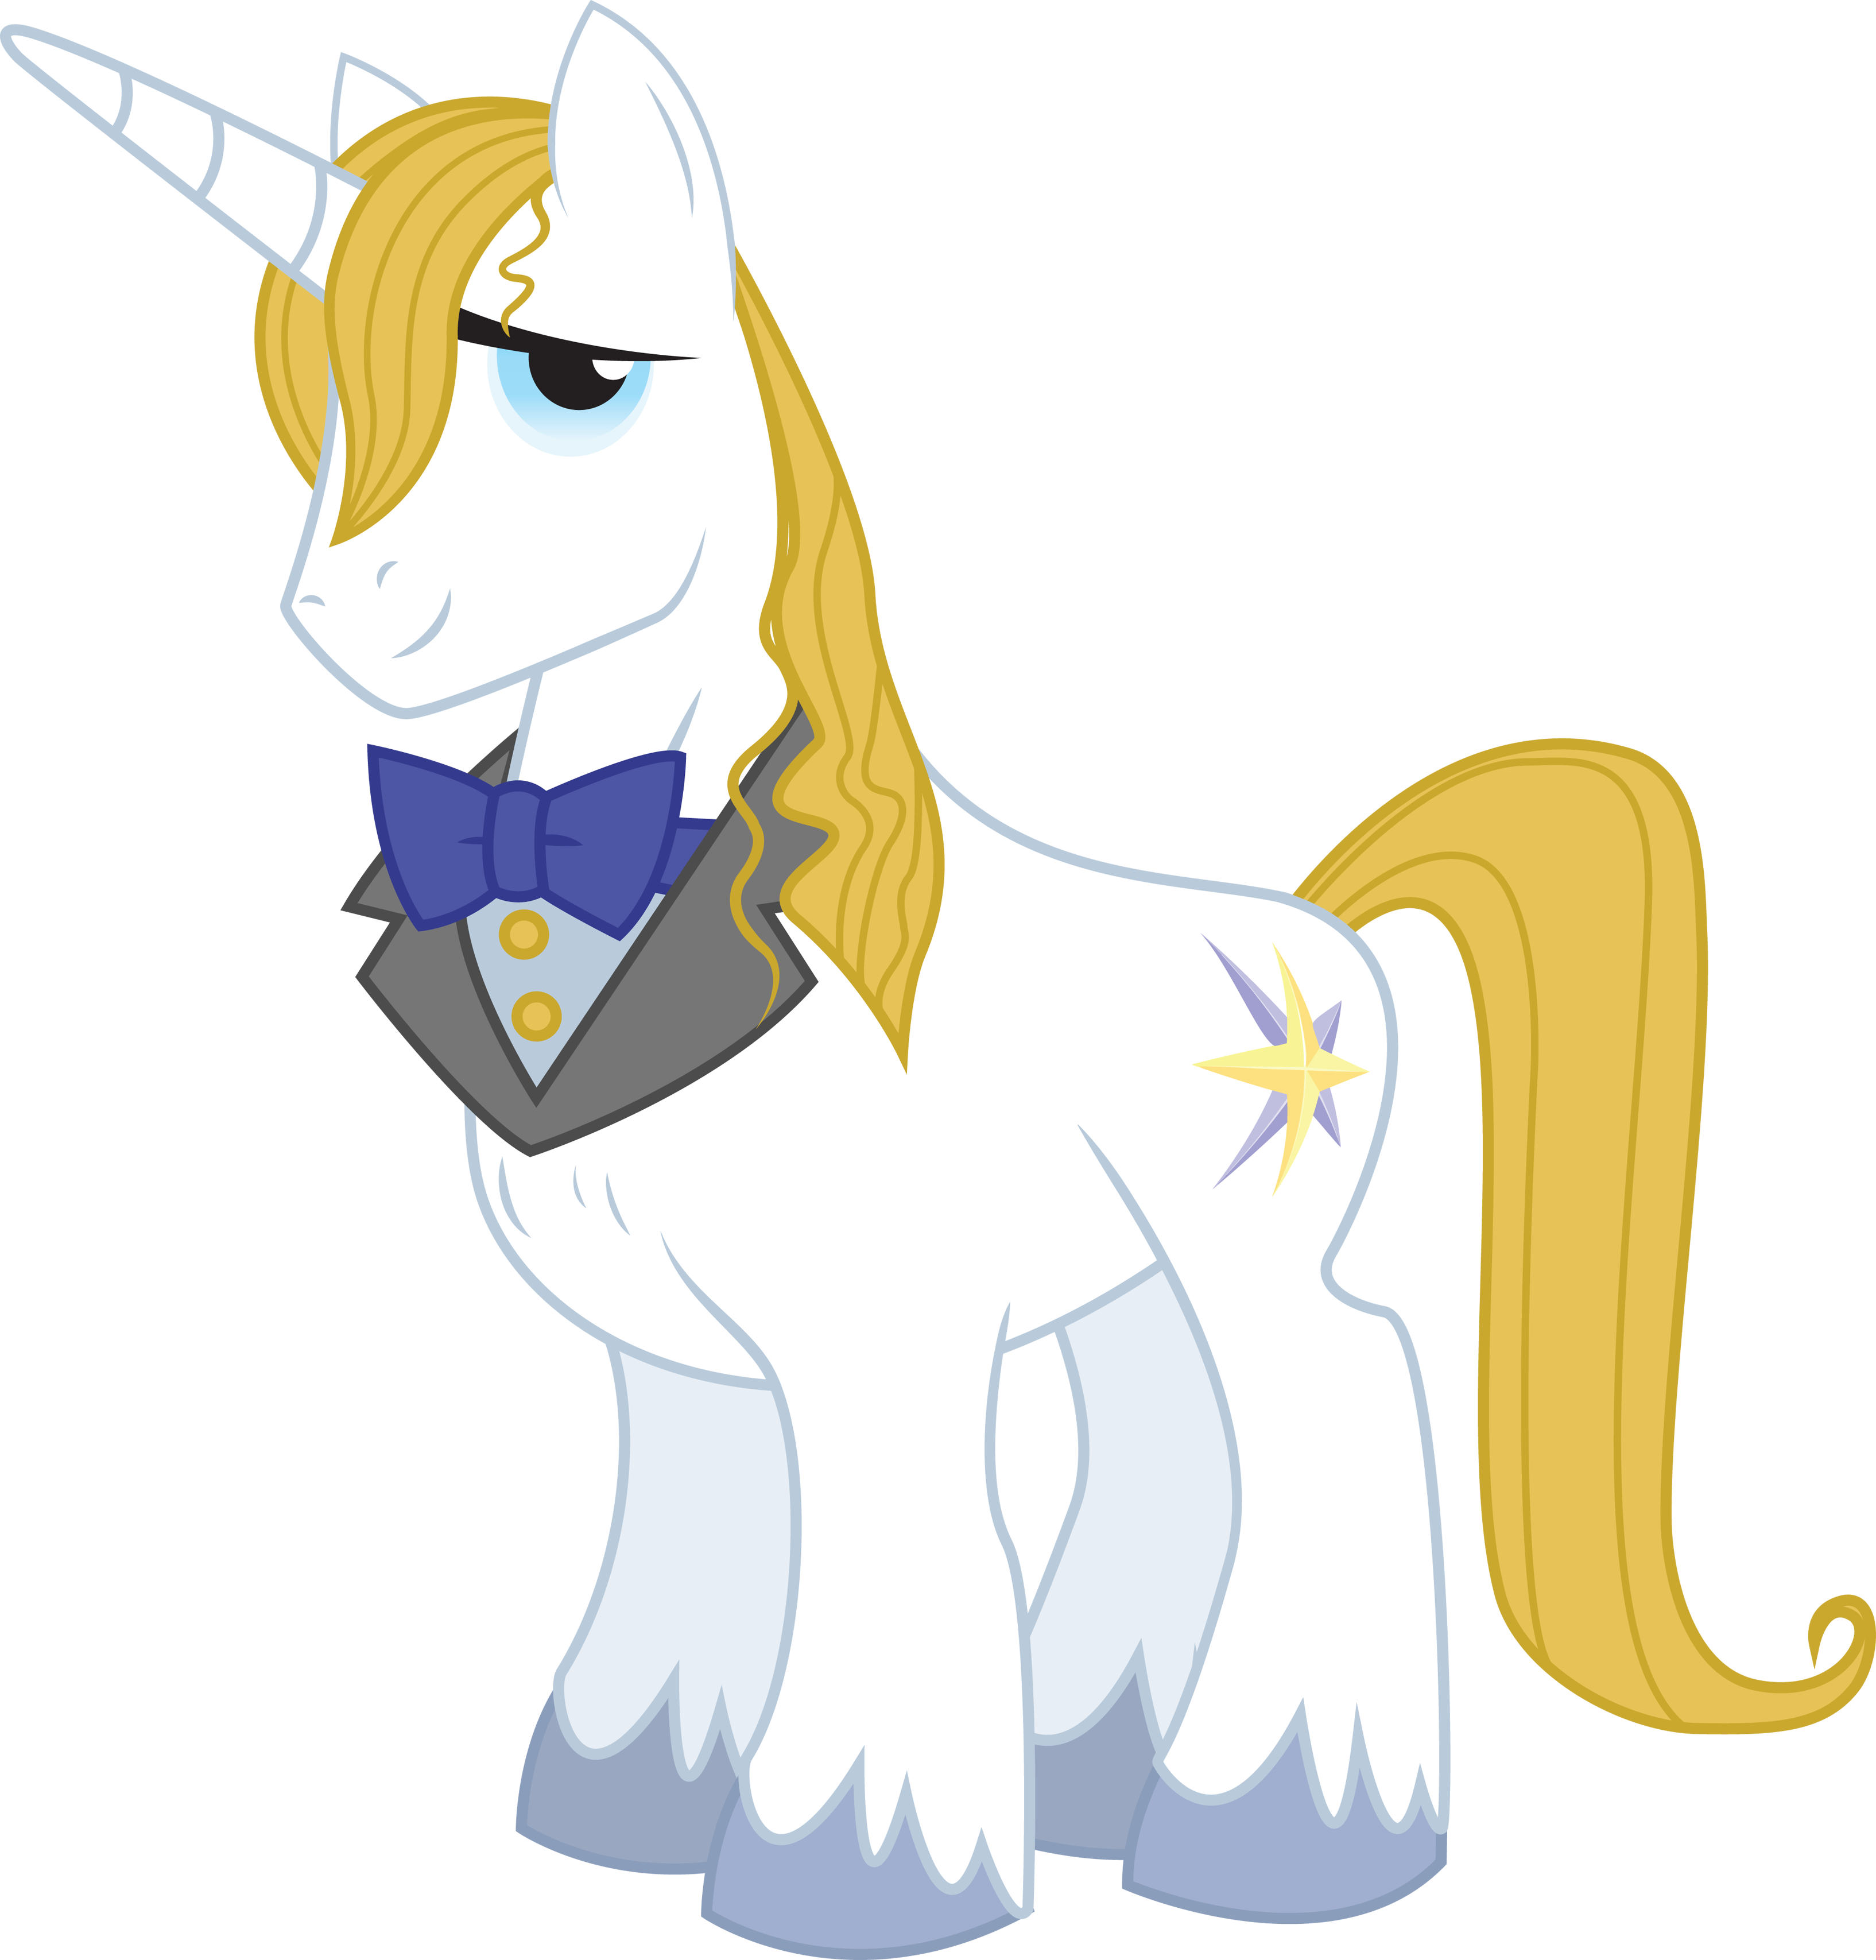 http://img2.wikia.nocookie.net/__cb20140112090631/mlp-gameloft/images/c/c0/Prince_Blueblood_vector.png